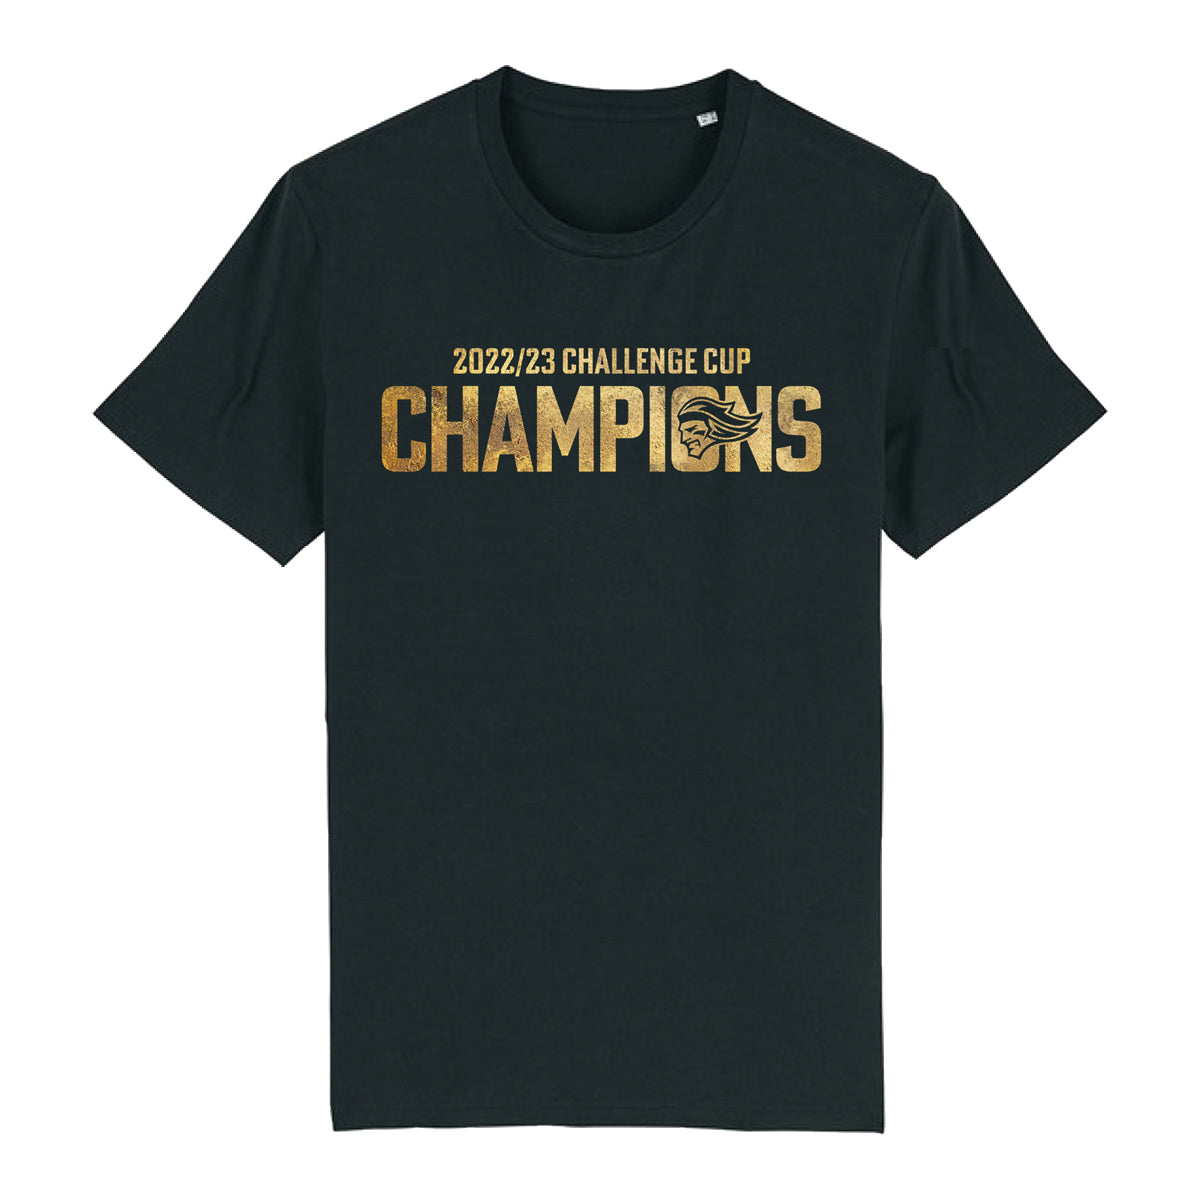 2022/23 Challenge Cup Champions T-Shirt